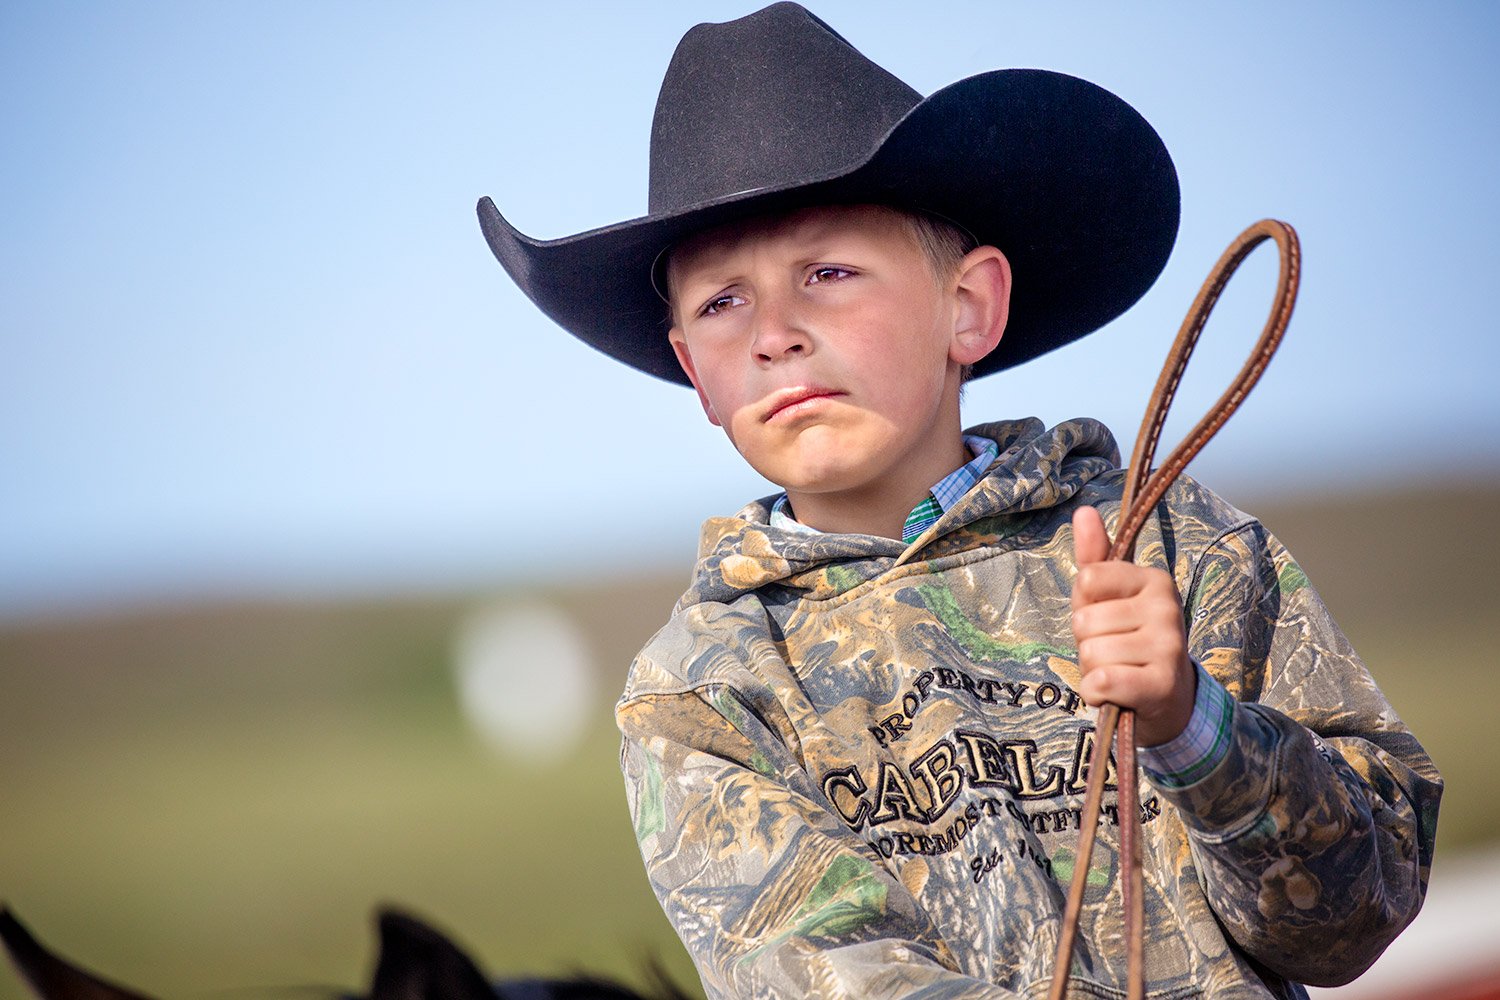 Agriculture and Commercial Photographer by Todd Klassy Photography of Country Kids Photo